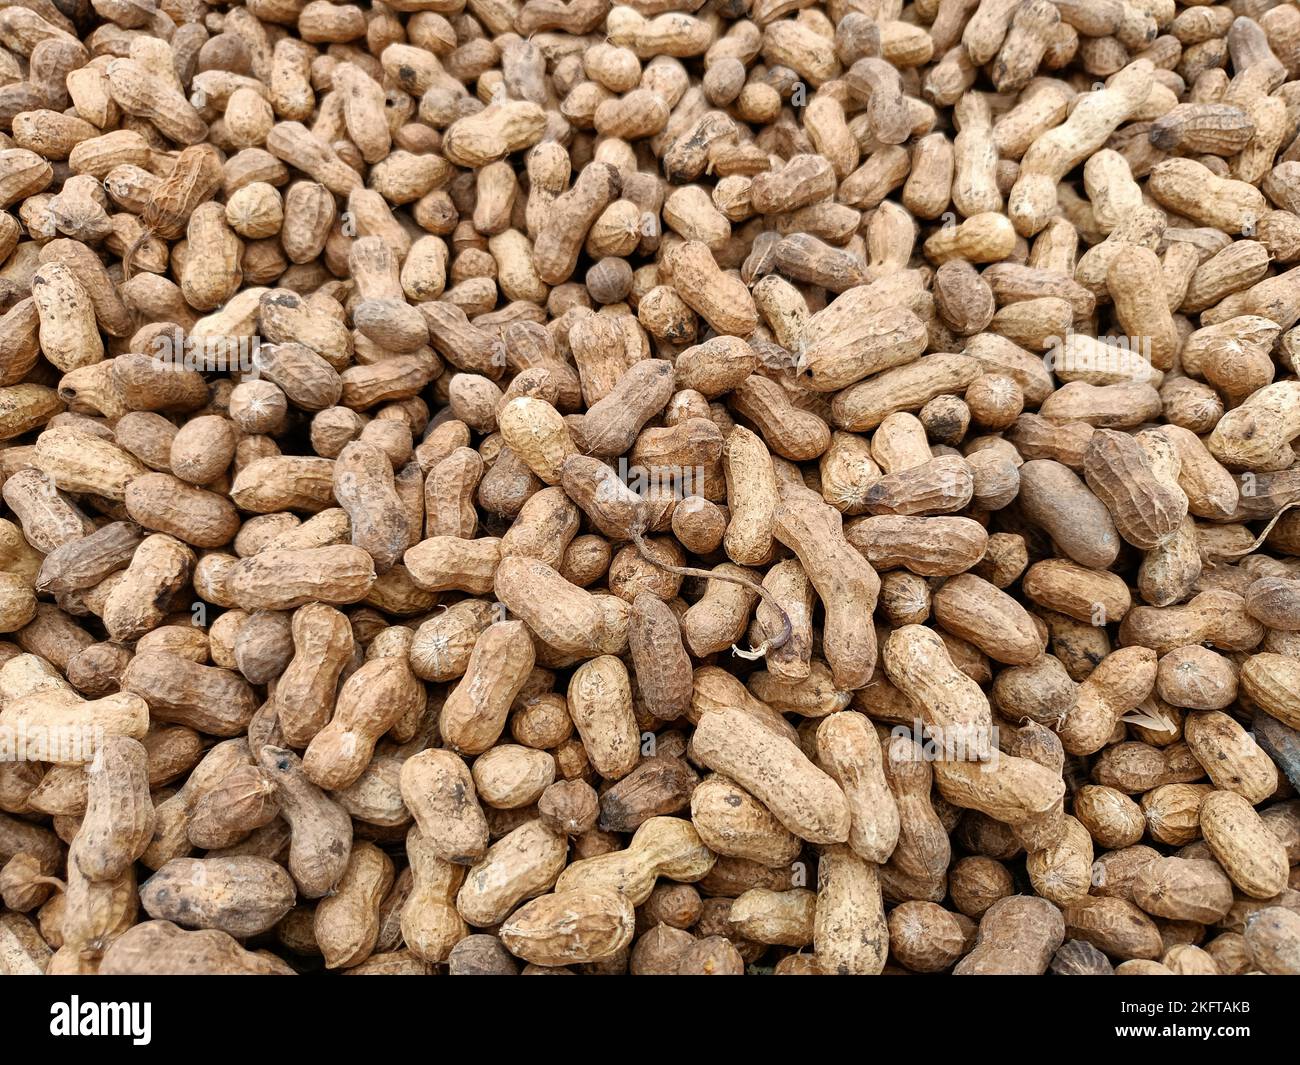 Going nuts over the peanut worms - Washington State Department of